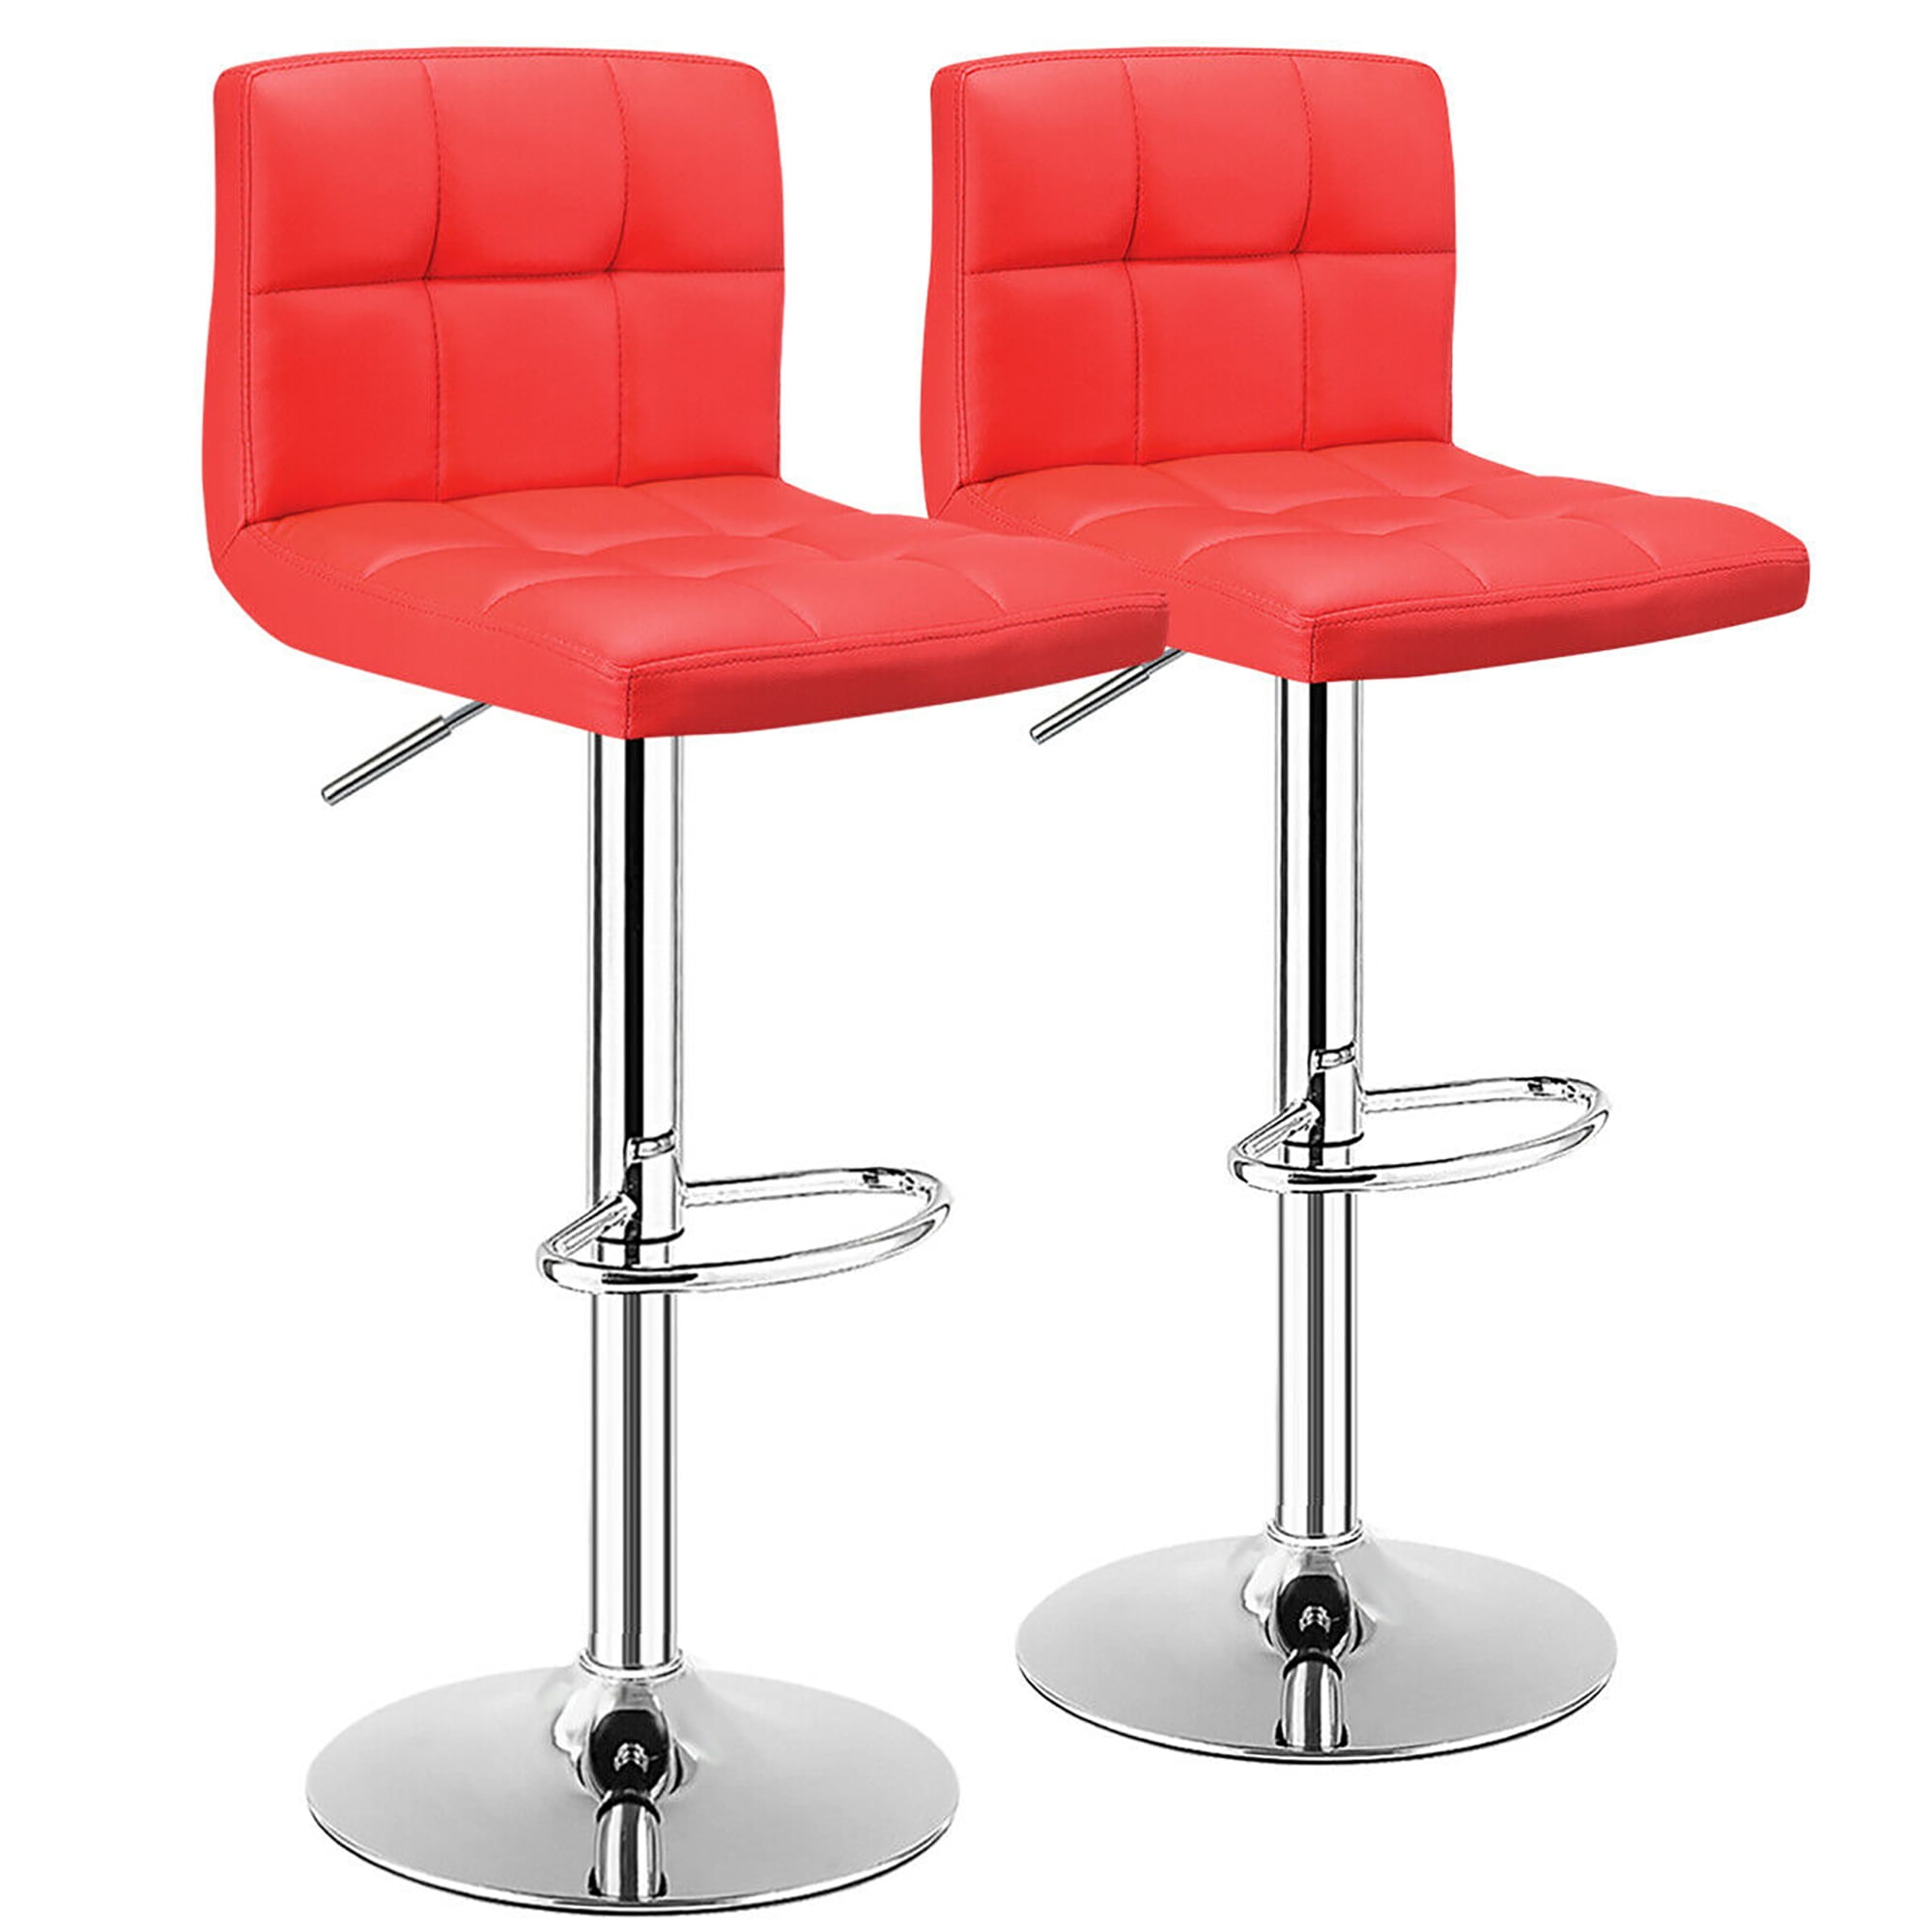 Set of 4 Bar Stools PU Leather Adjustable Swivel Pub Chair Kitchen Dining Red 